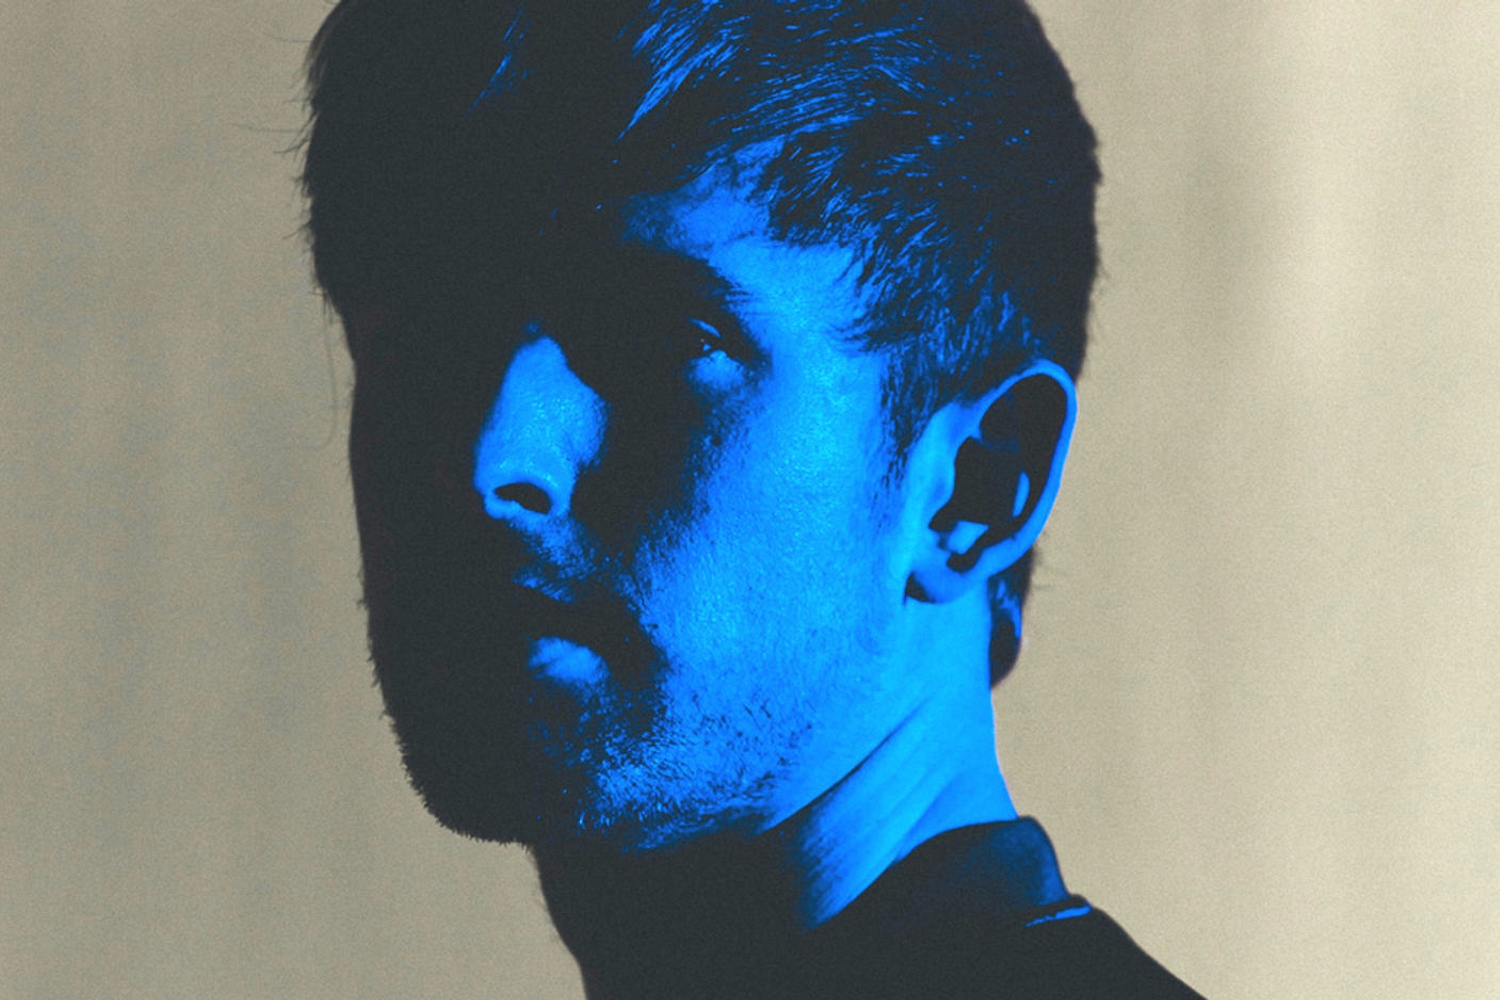 James Blake’s 1-800 Dinosaur collective are coming back to London